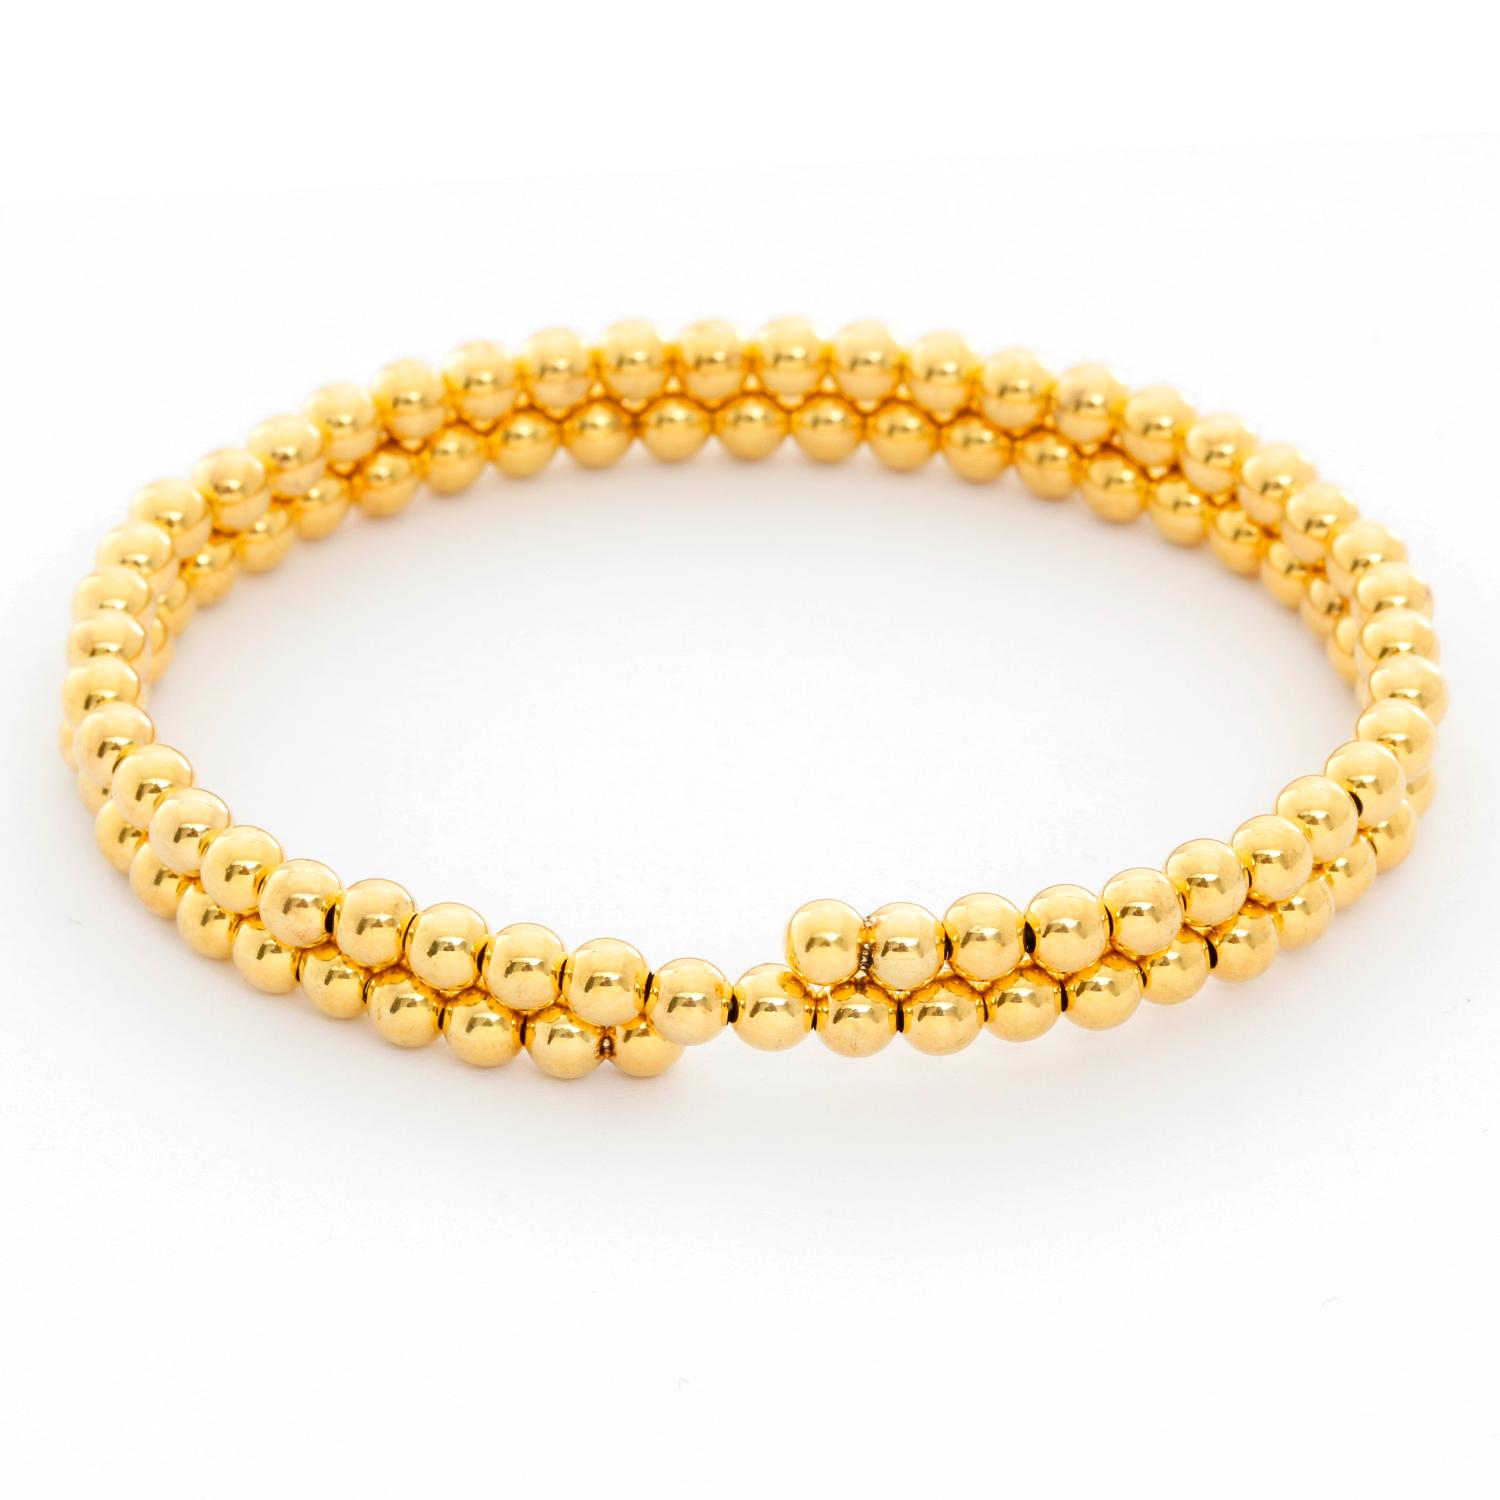 14K Yellow Gold Beaded Double Strand Wrap Bracelet  - 4mm Yellow Gold beads make up this cuff bracelet with two strands. Bracelet measures 6.5 inches but has some stretch. New with DeMesy box. 